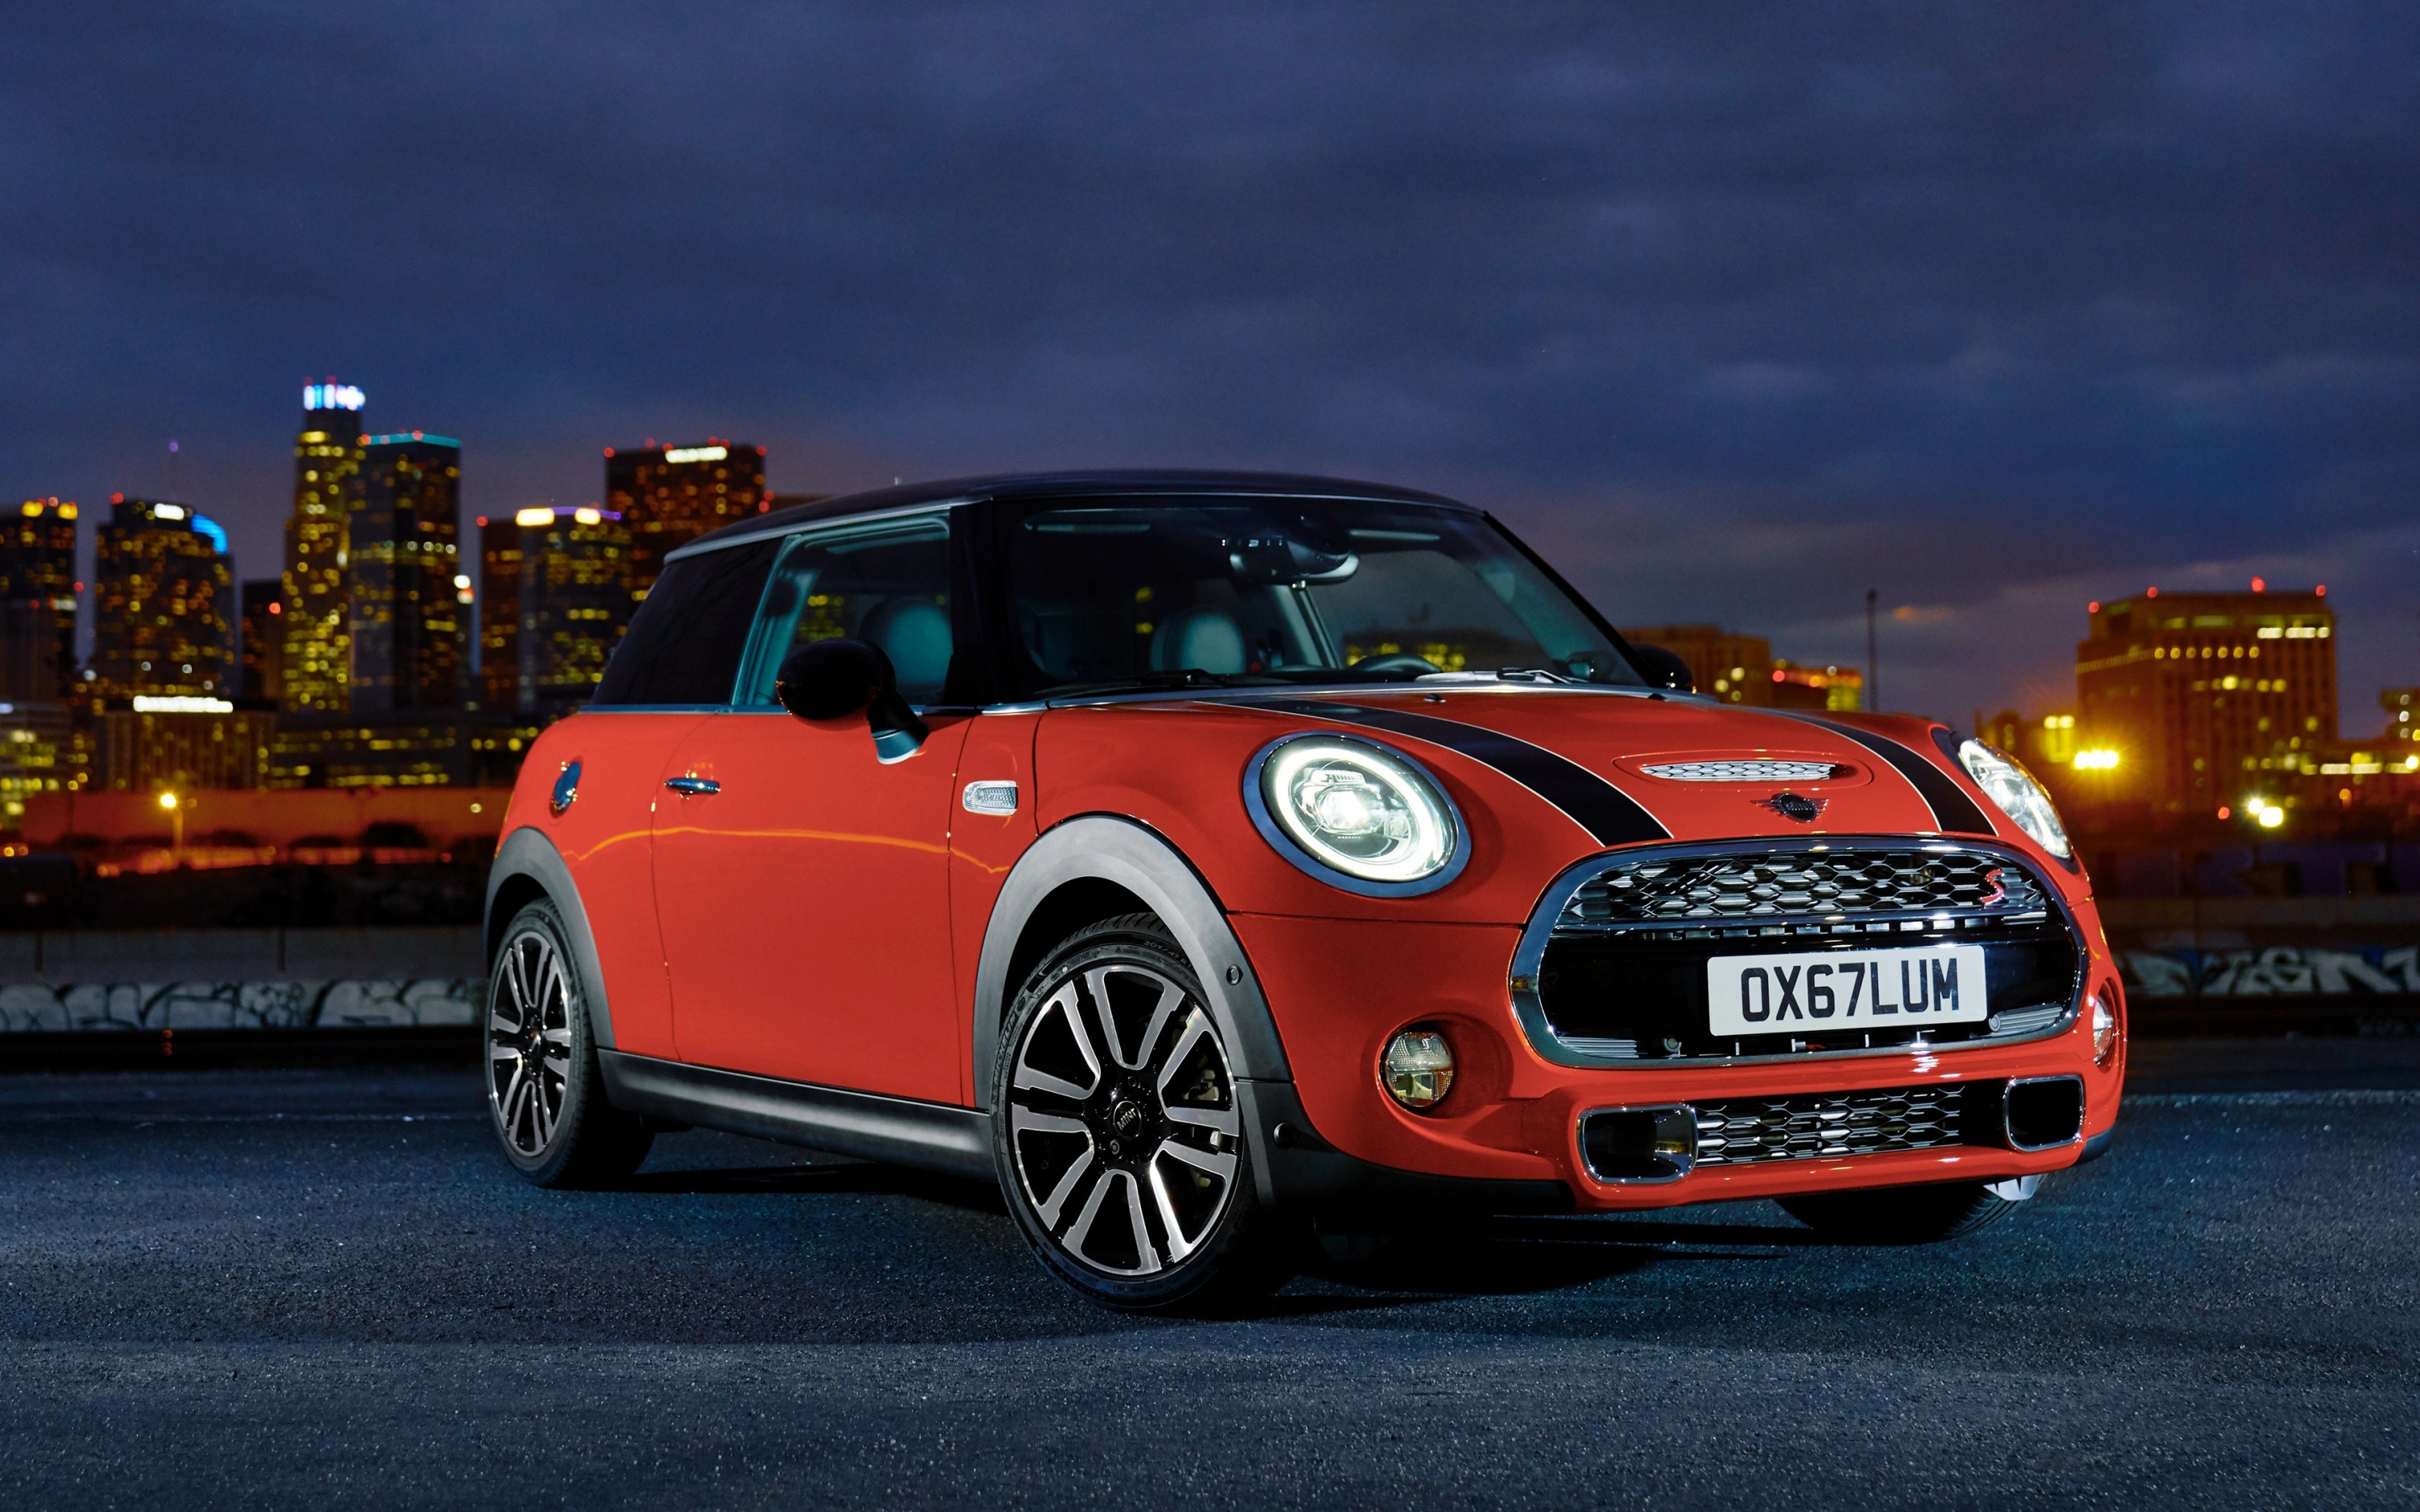 MINI Cooper S, lovely, compact car, 2880x1800 wallpaper